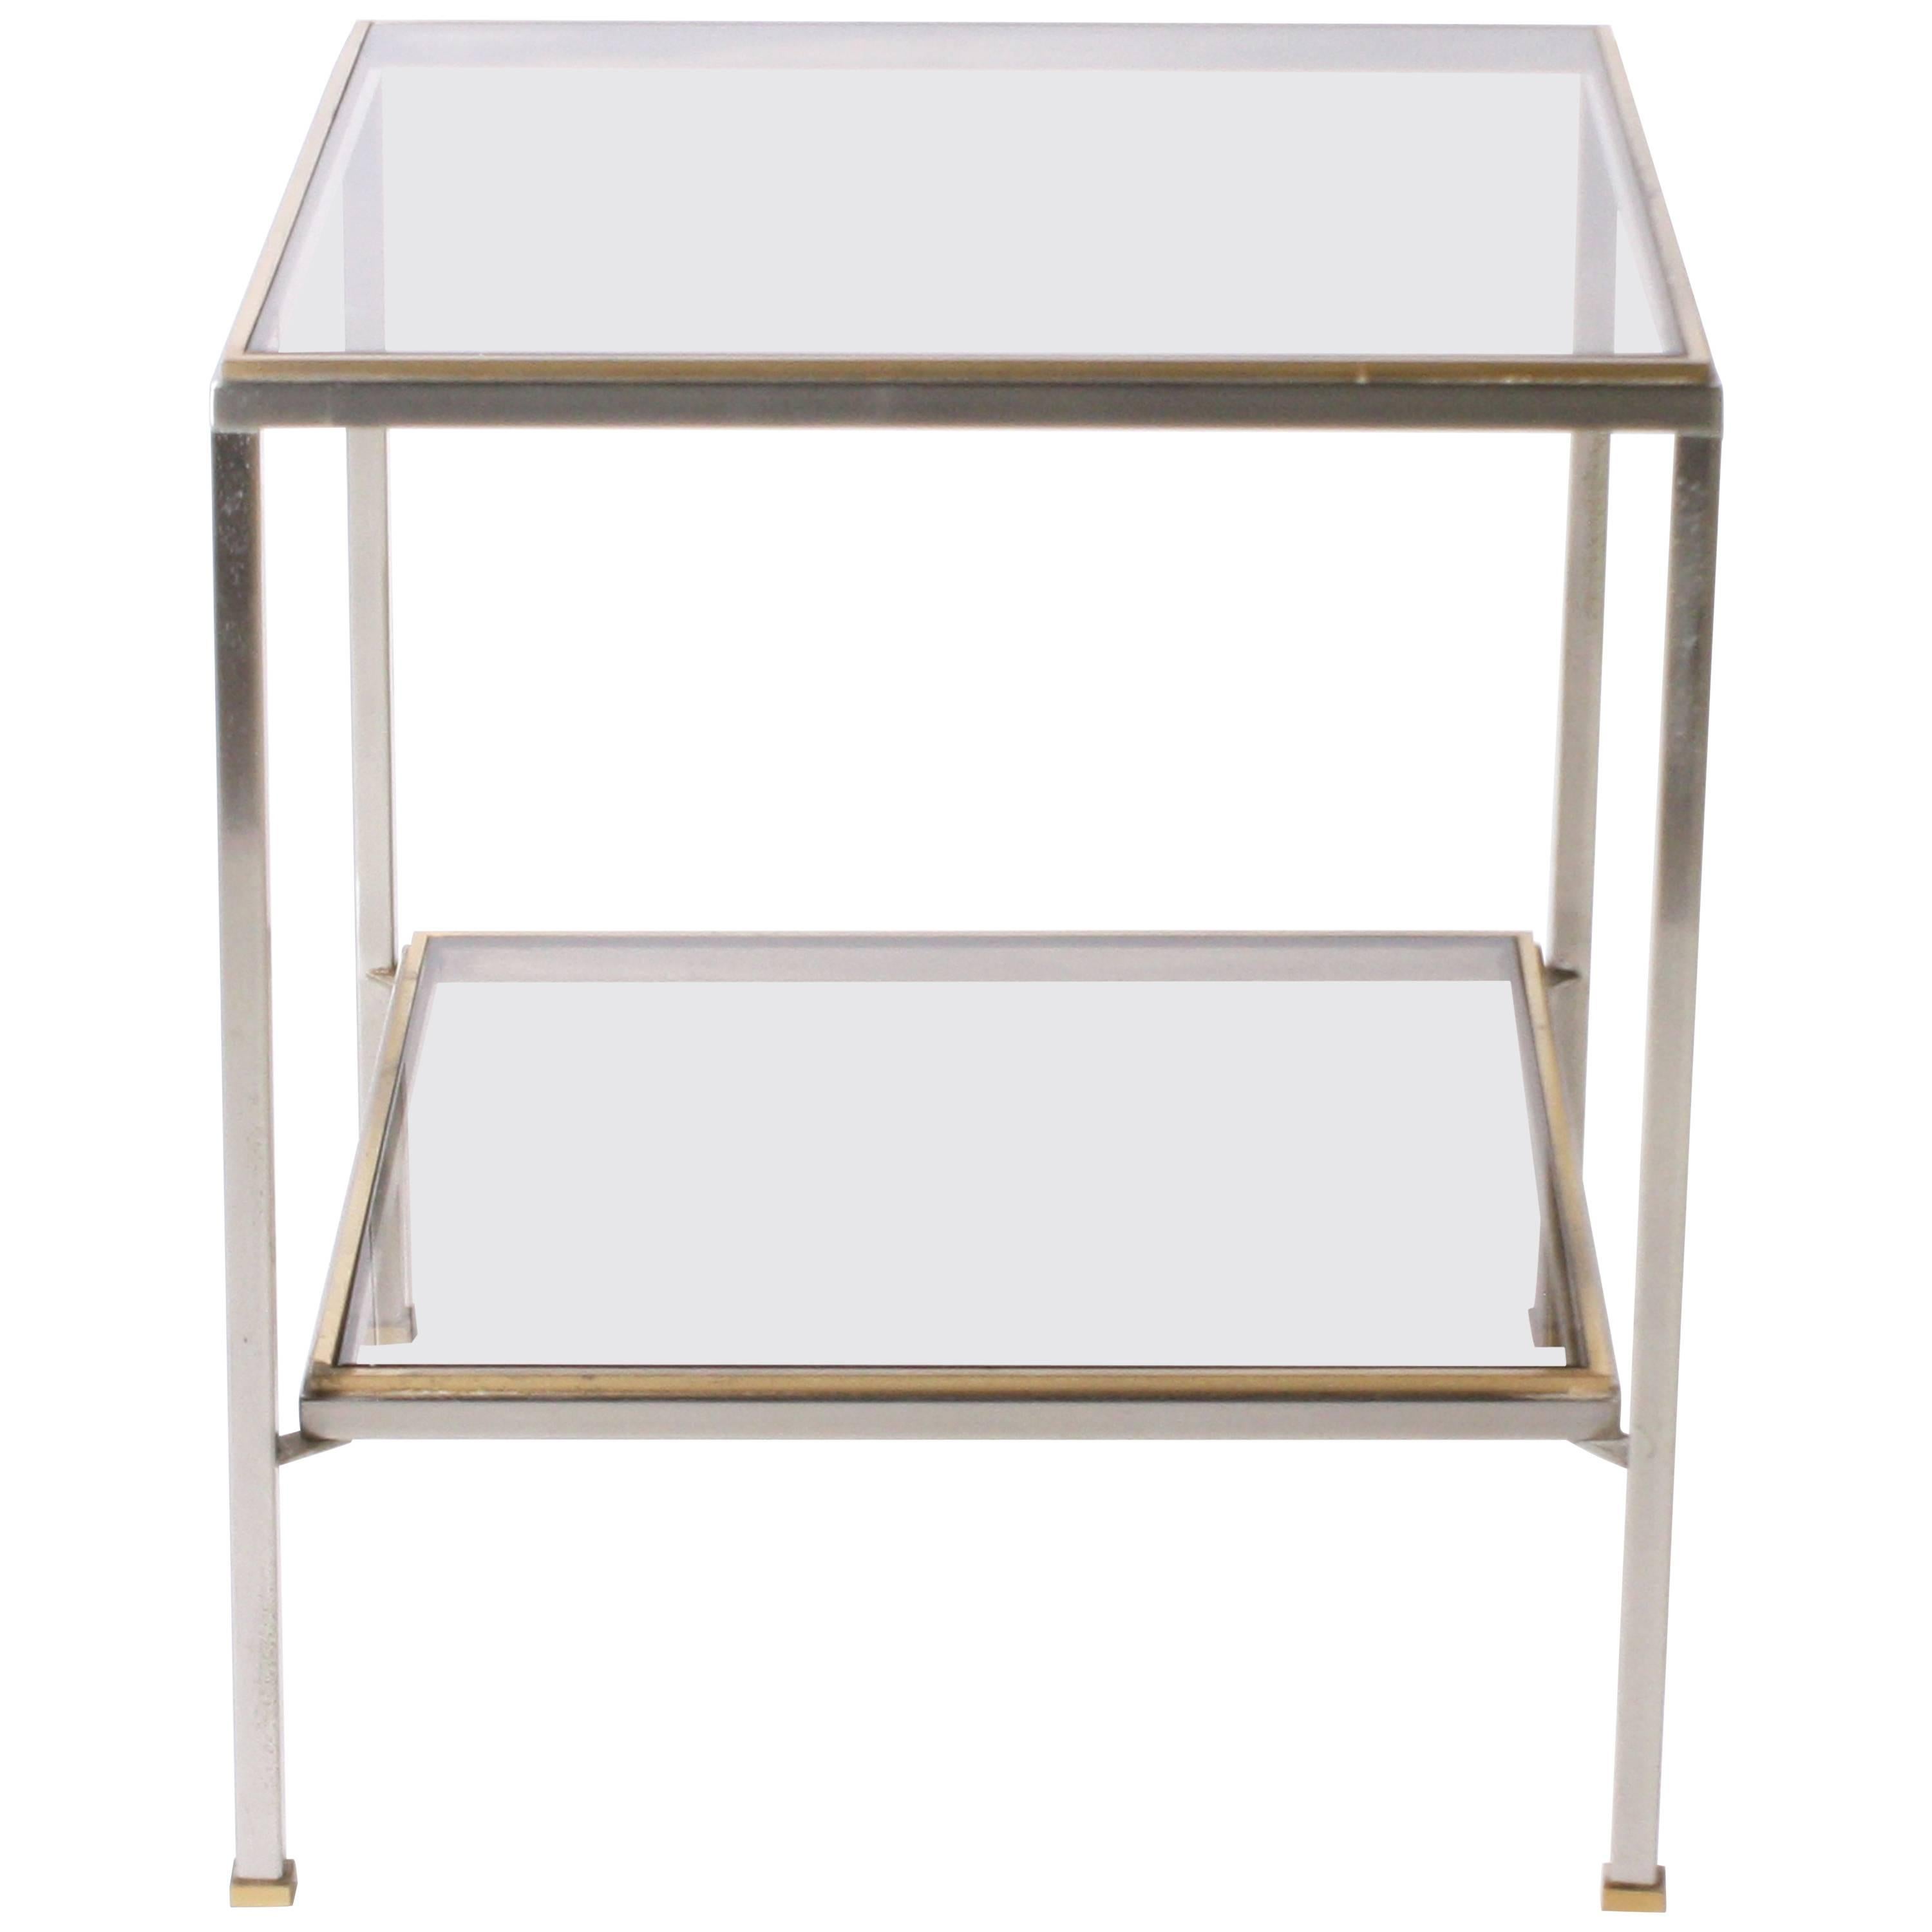 Nickel and Brass Cigarette Table with Glass Shelves, circa 1970